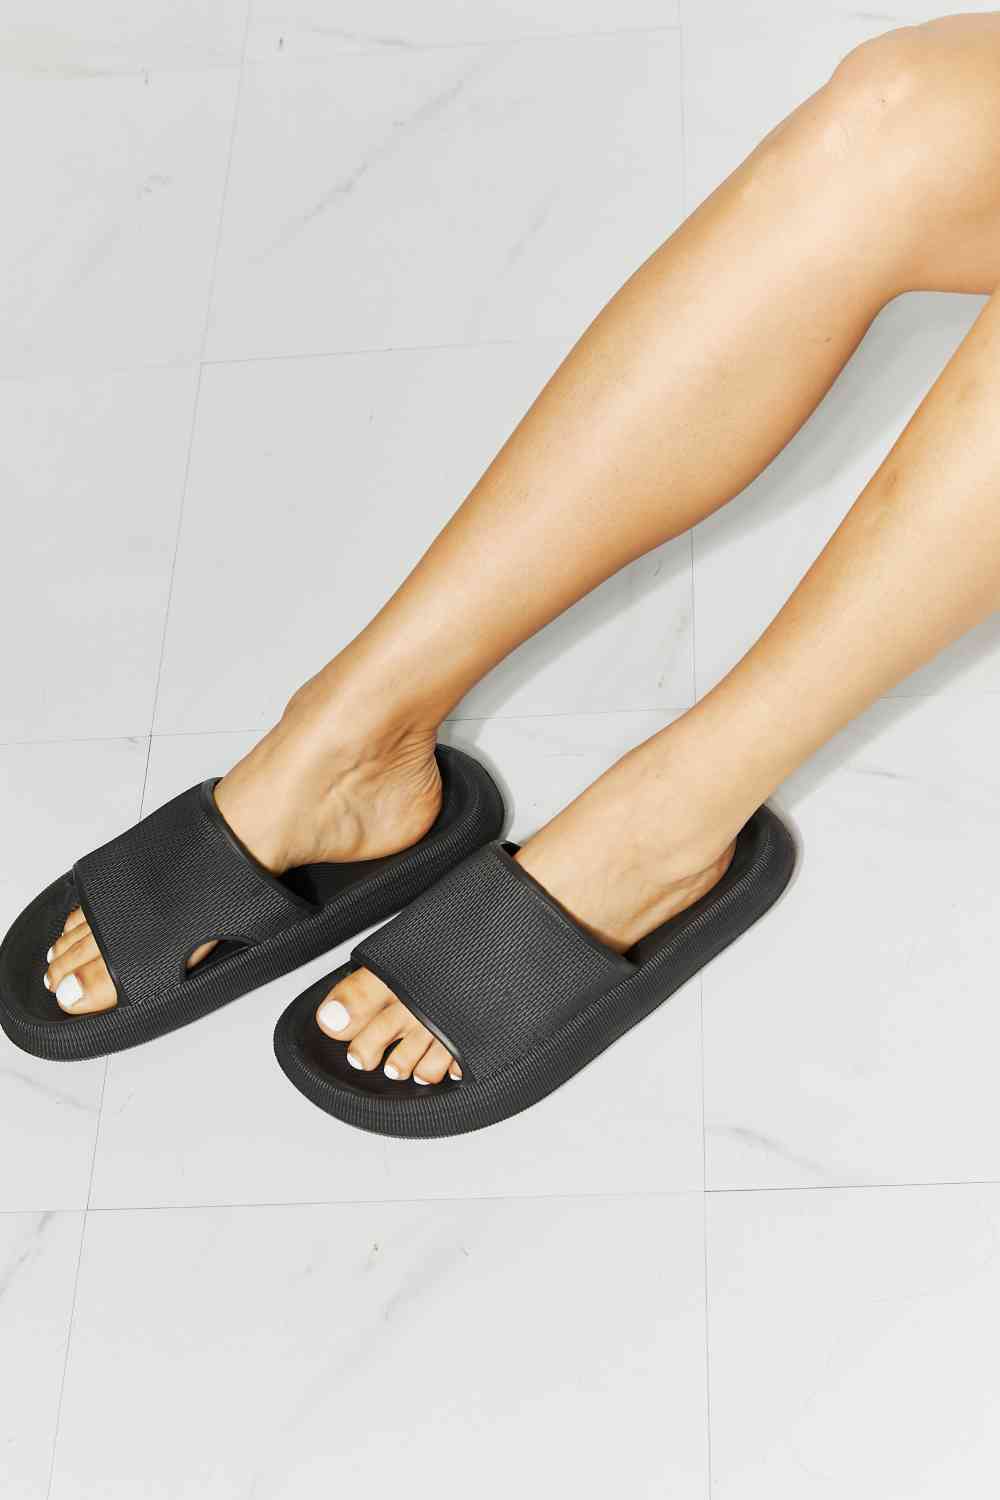 MMShoes Arms Around Me Open Toe Slide in Black - Opulence & Essence